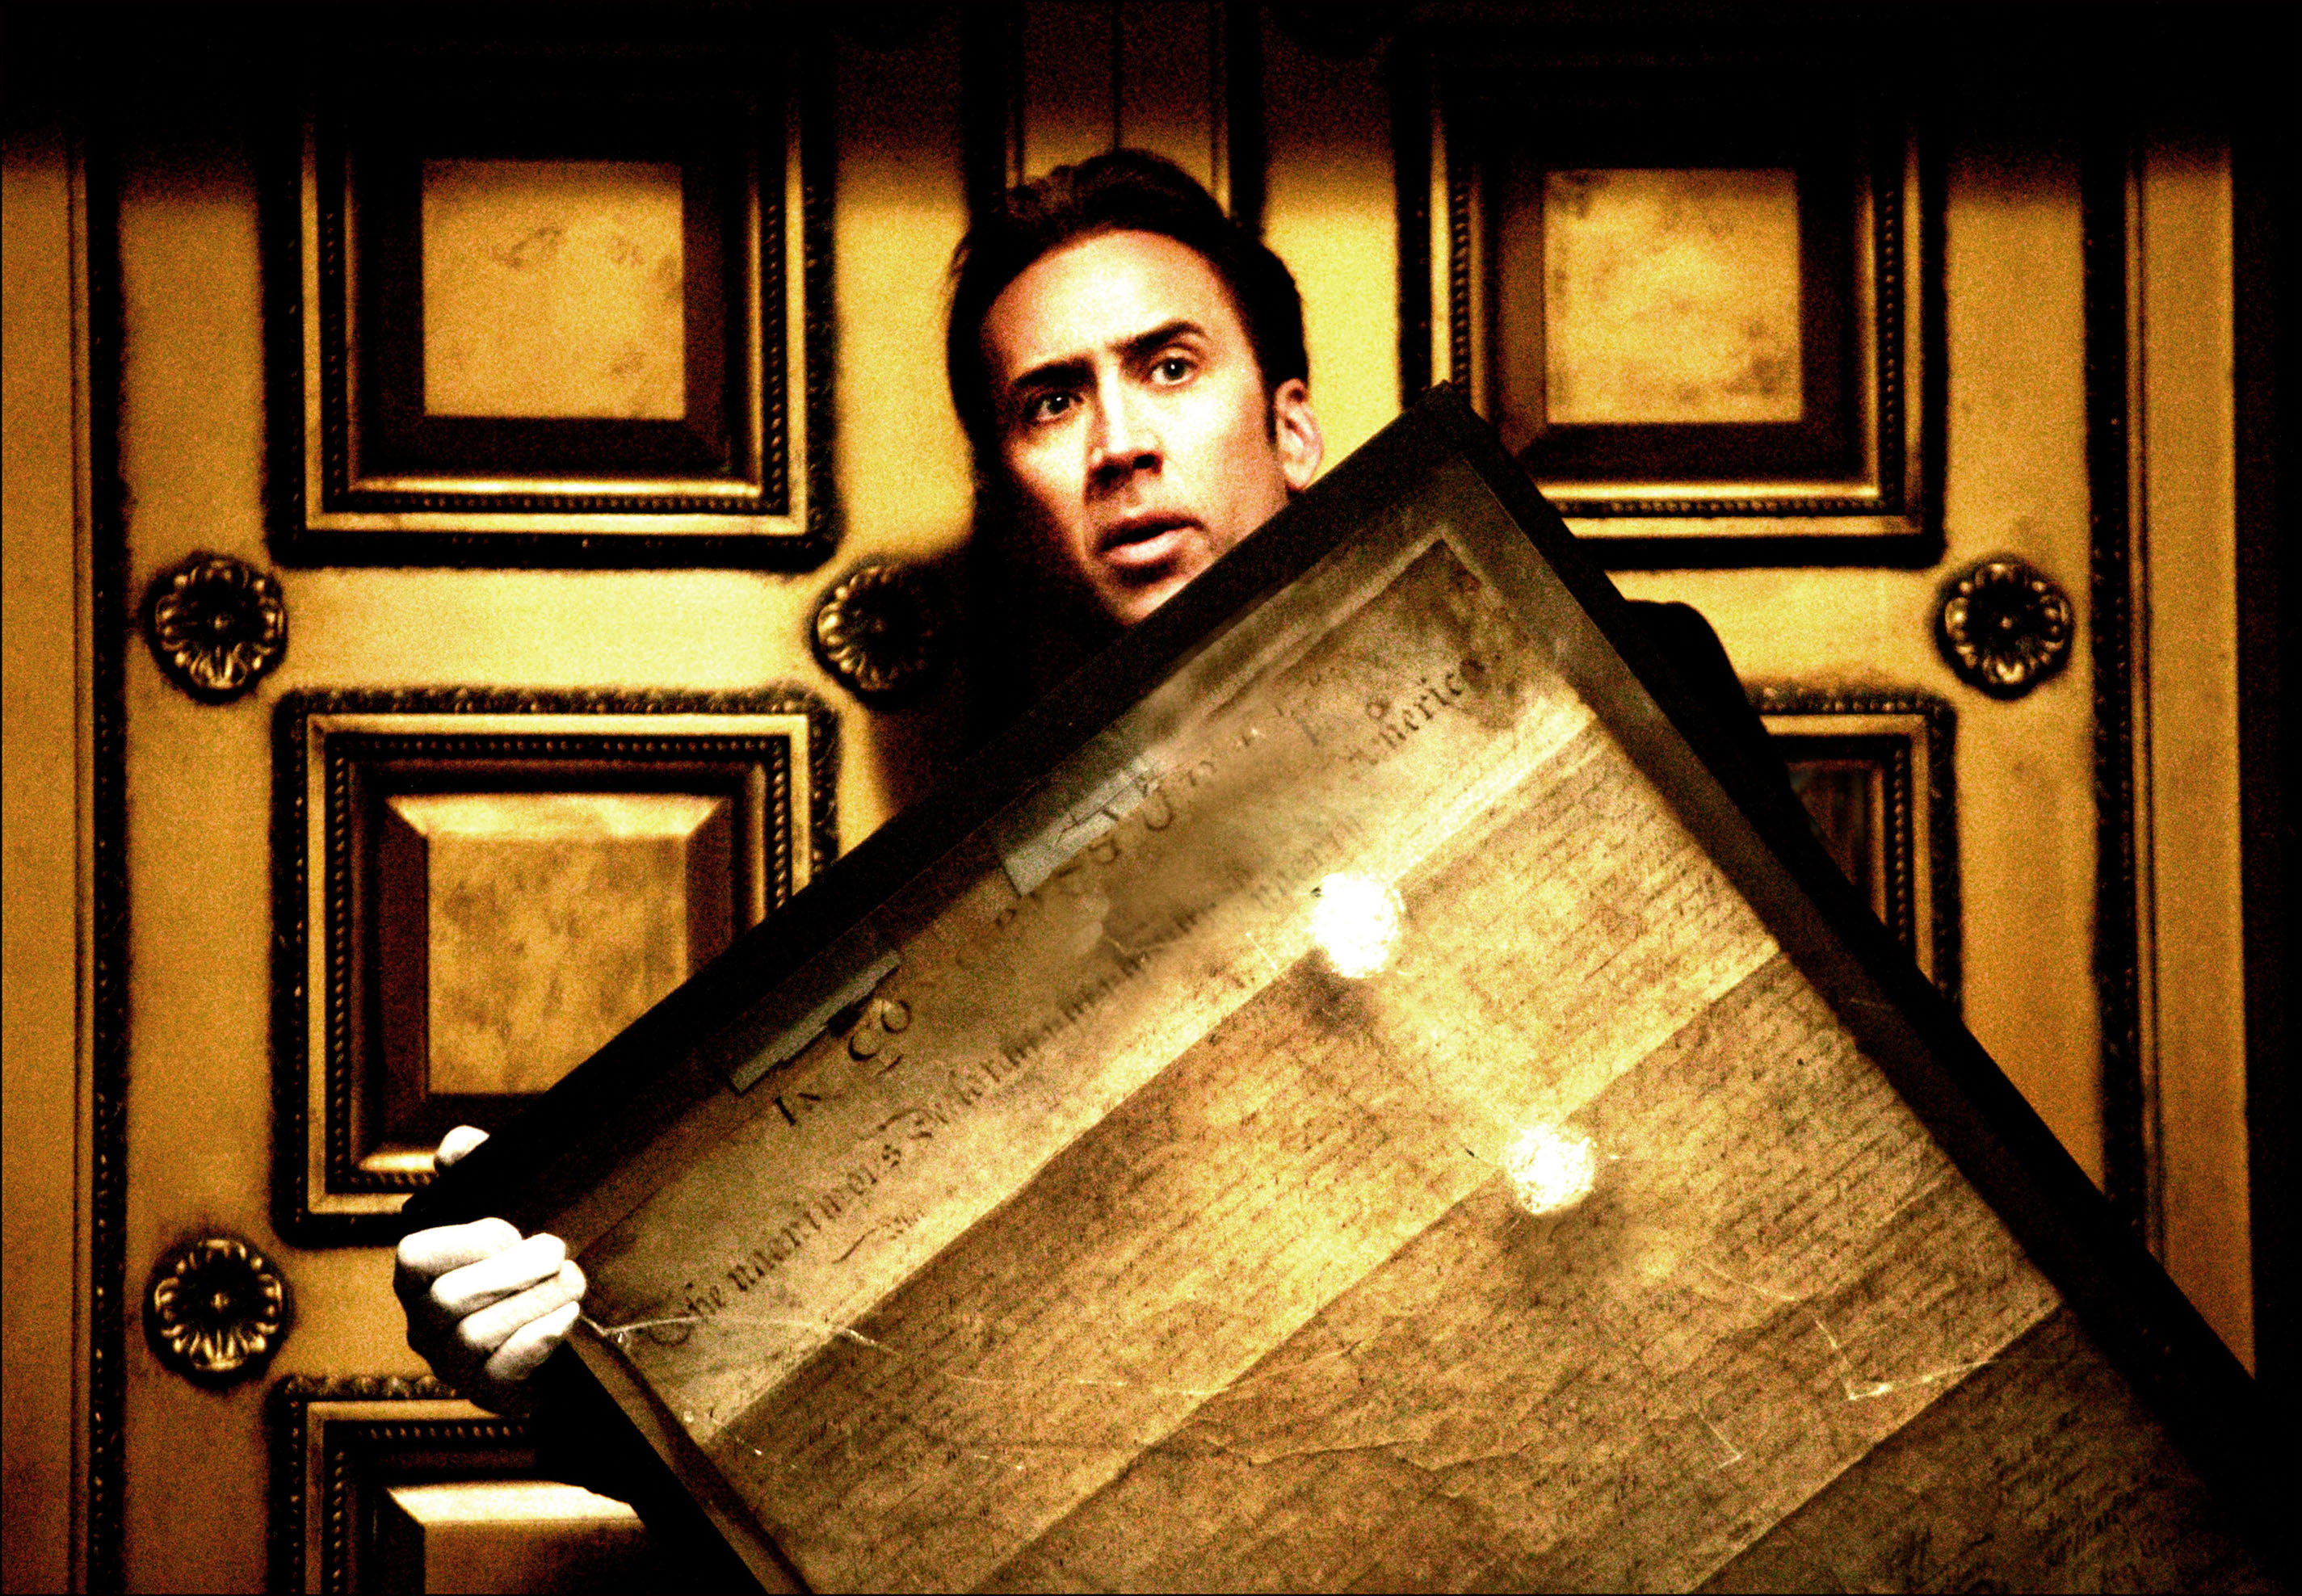 Nicolas Cage holding the declaration of independence during the heist scene